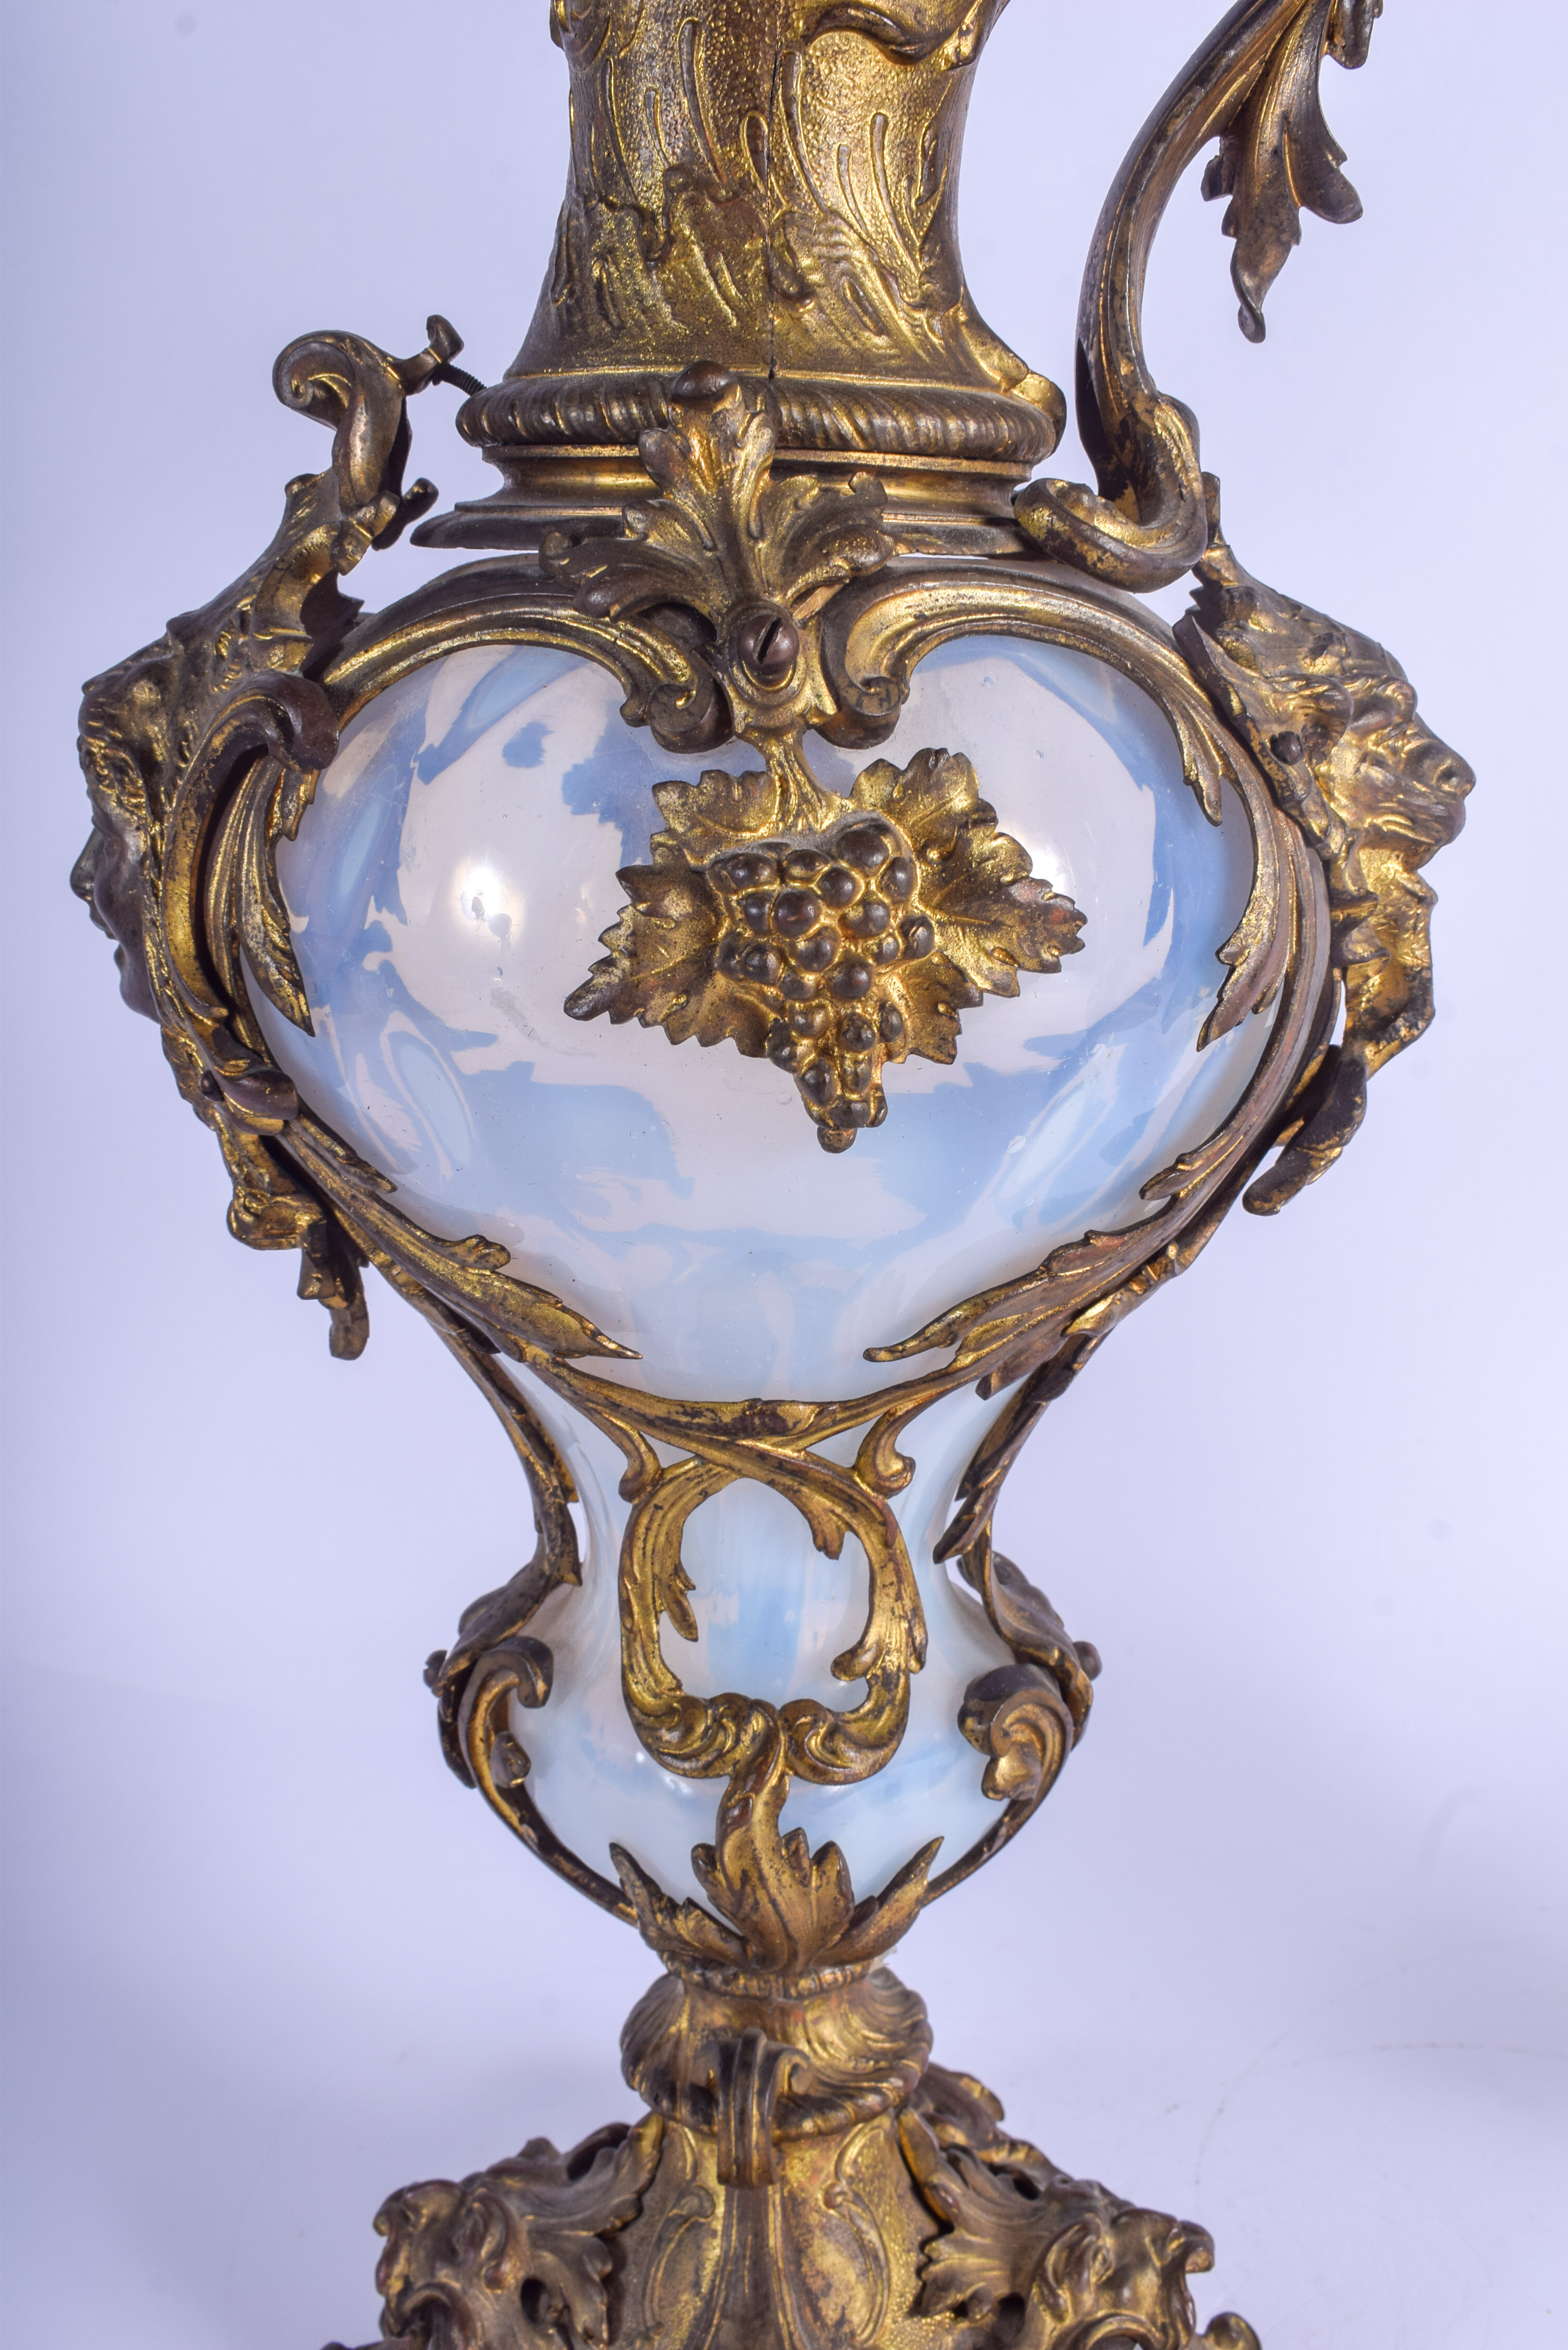 A LARGE PAIR OF 19TH CENTURY VASELINE GLASS EWERS mounted in French bronze. 47 cm x 16 cm. - Image 3 of 4